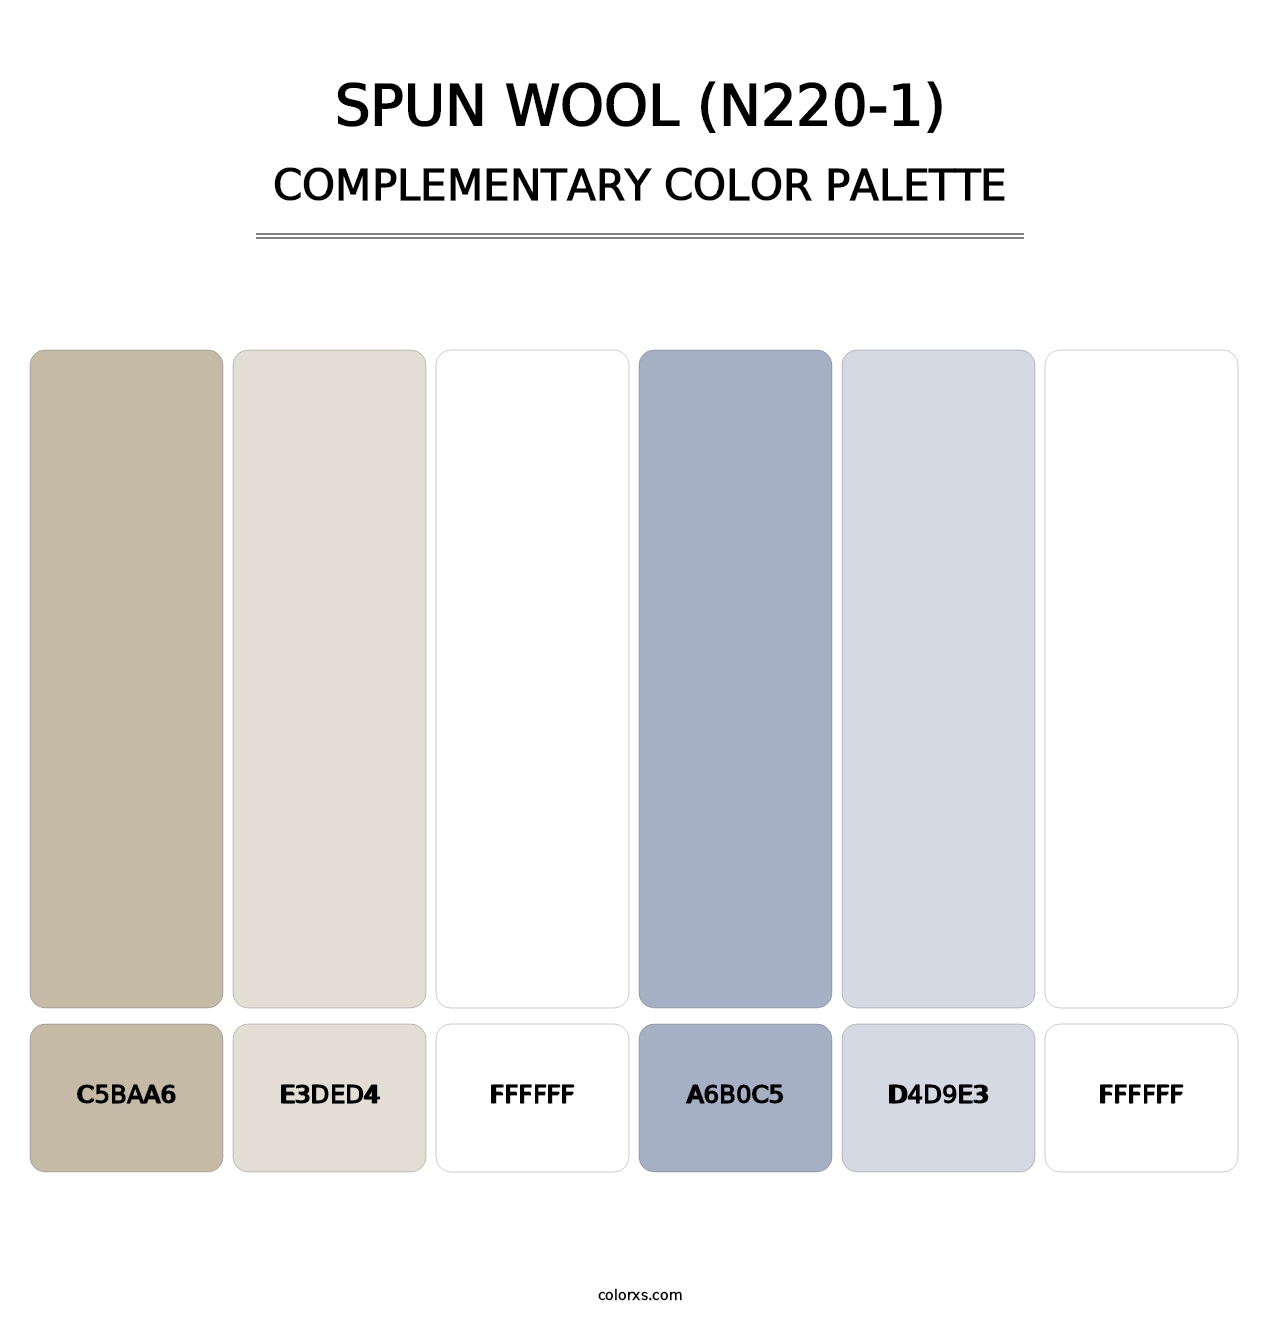 Spun Wool (N220-1) - Complementary Color Palette